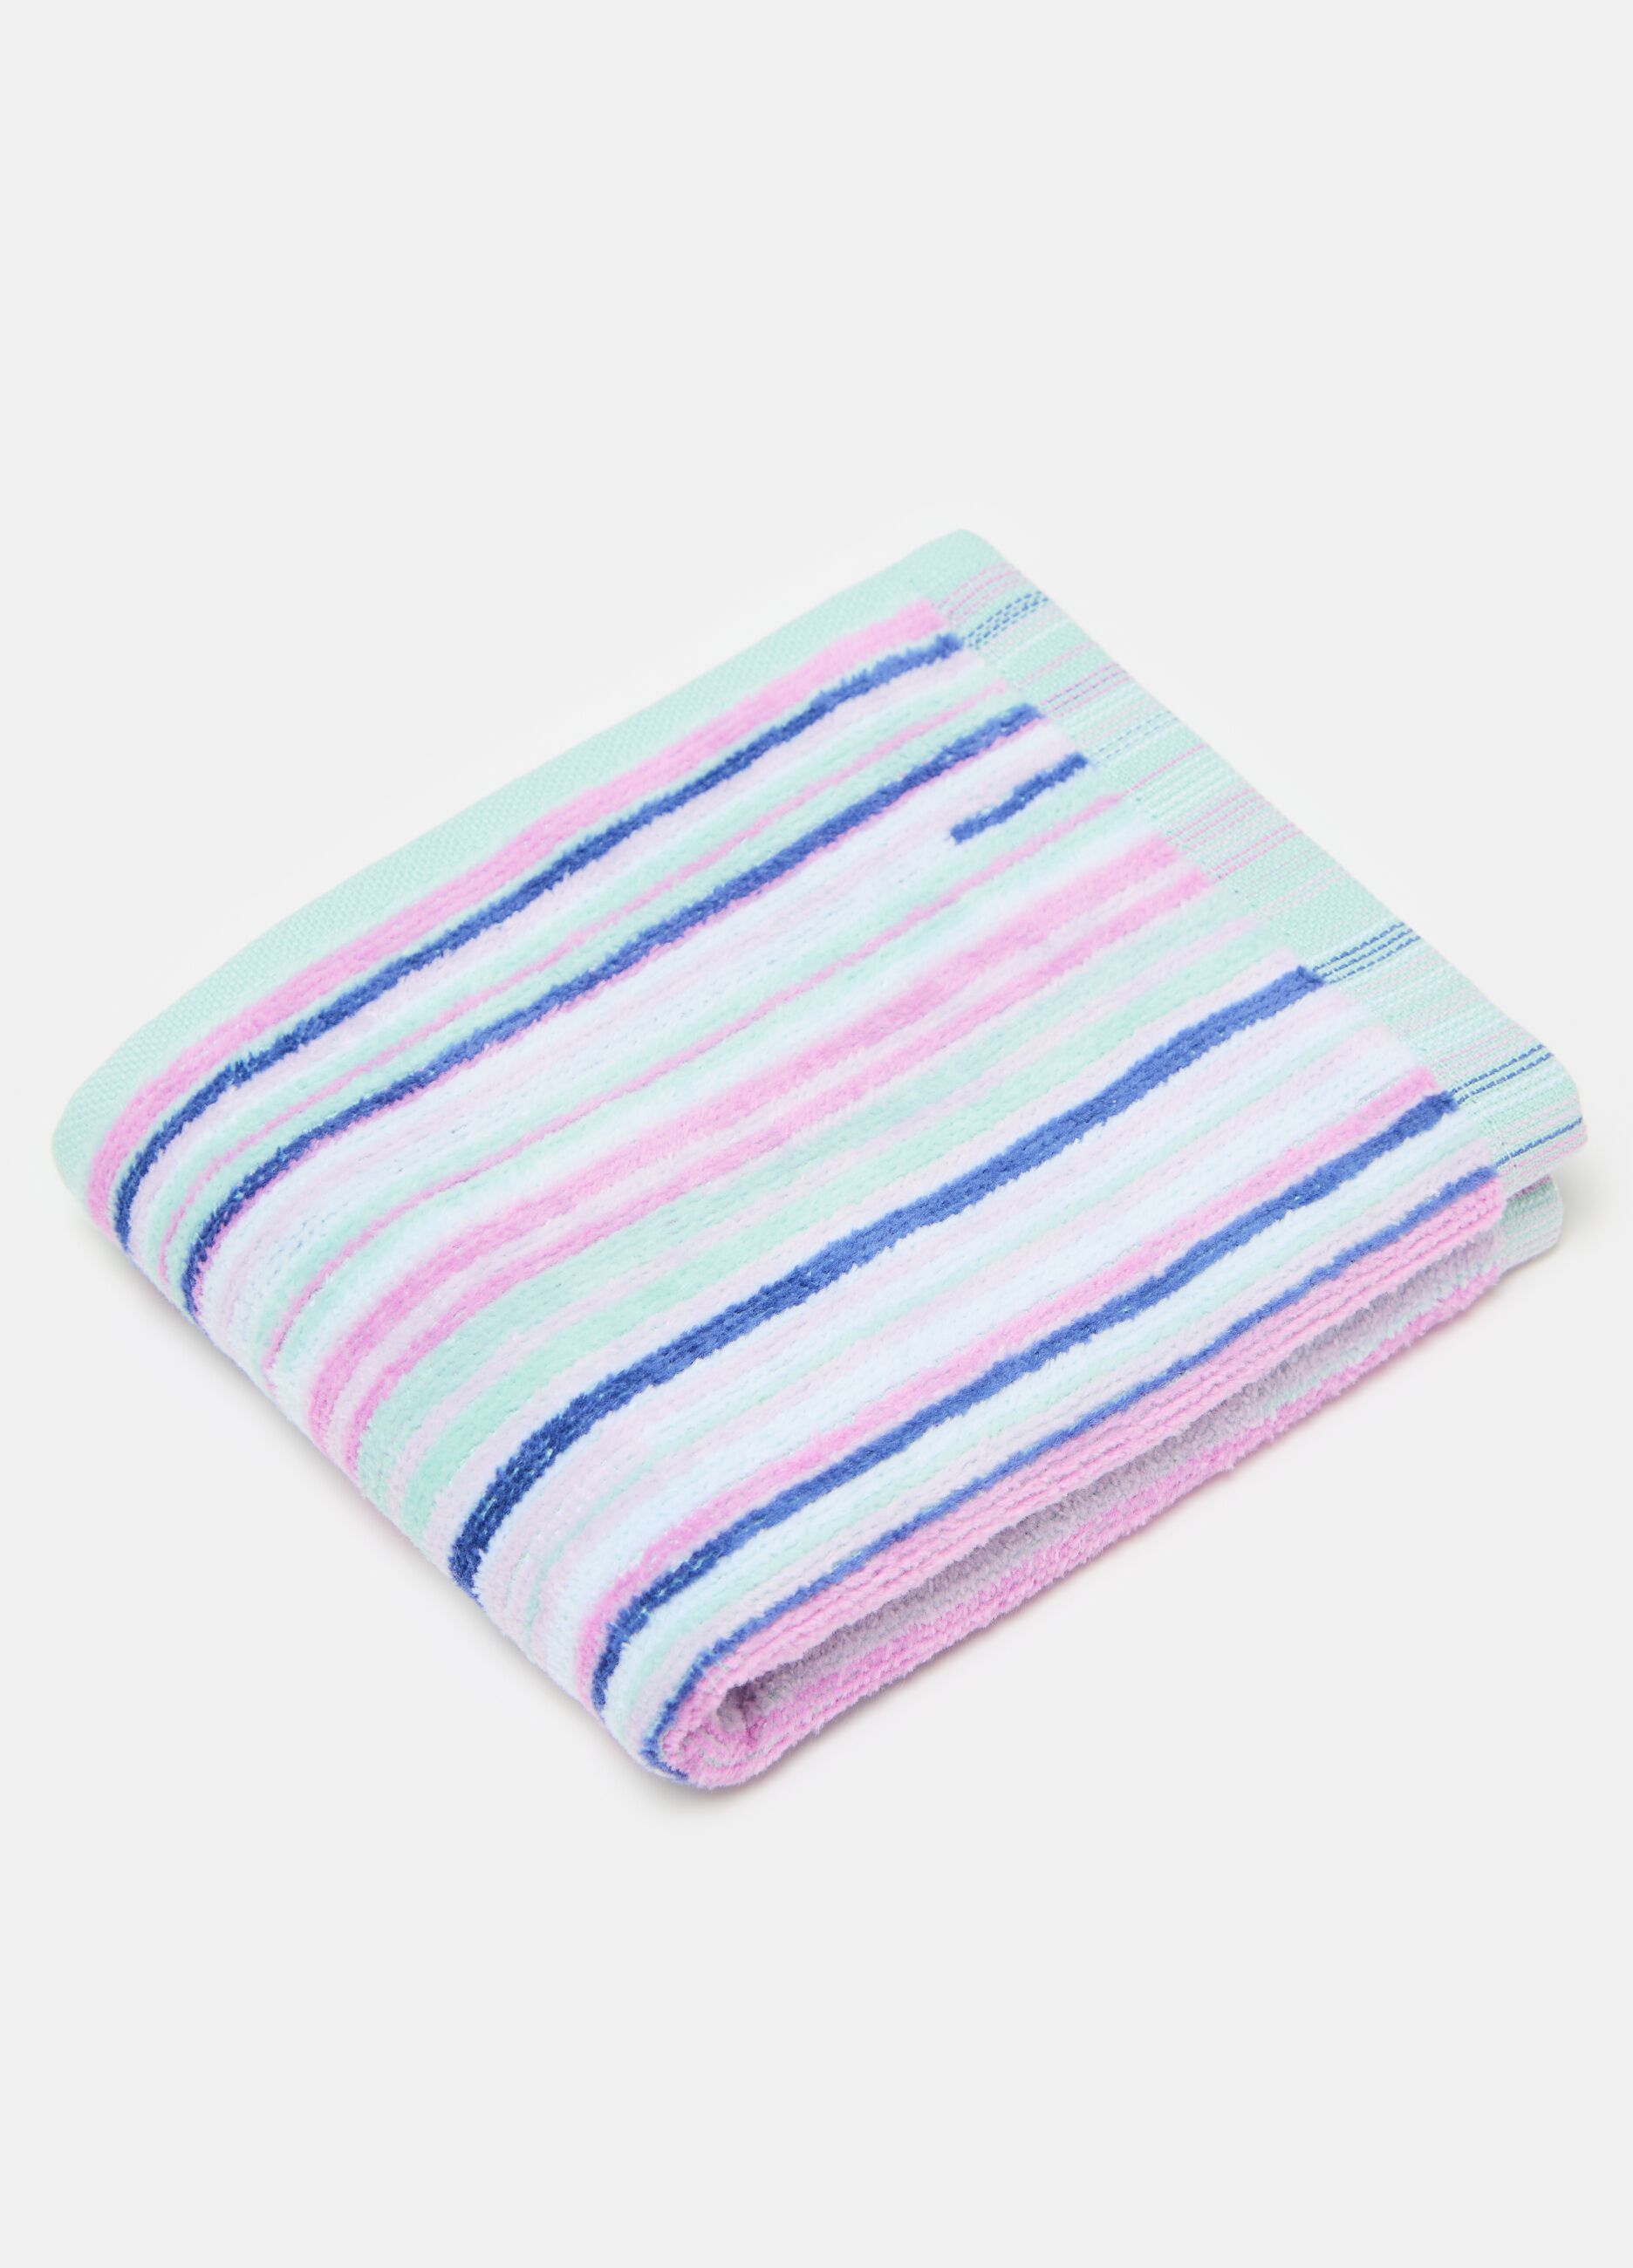 Guest towel with striped pattern